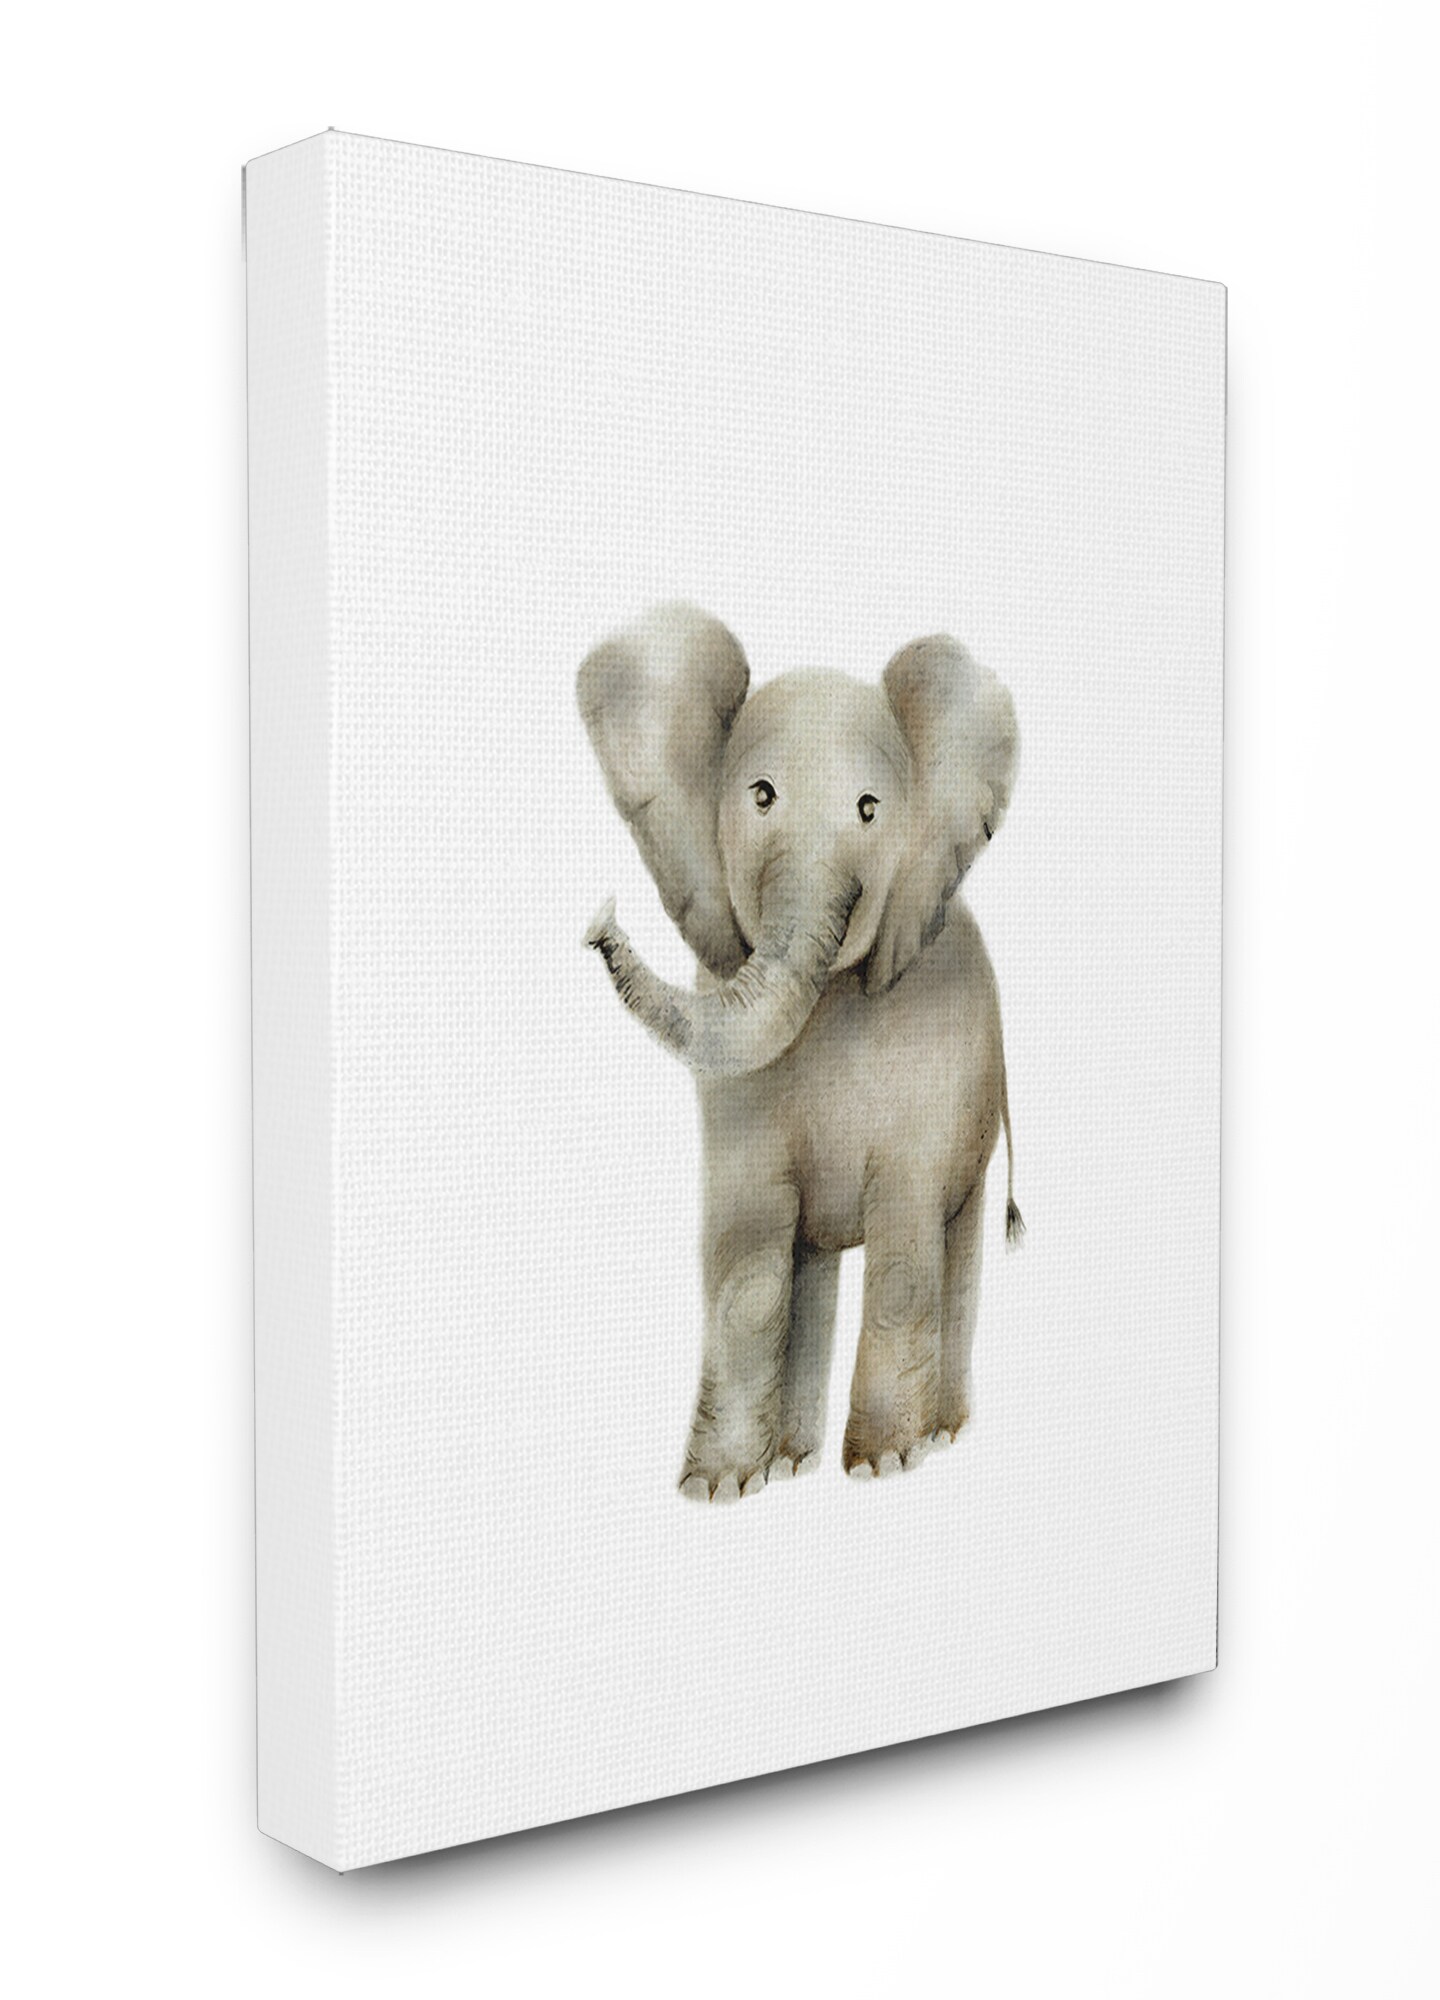 24 x 1.5 x 30 Proudly Made in USA Stupell Industries Mama and Baby Elephants Oversized Stretched Canvas Wall Art 